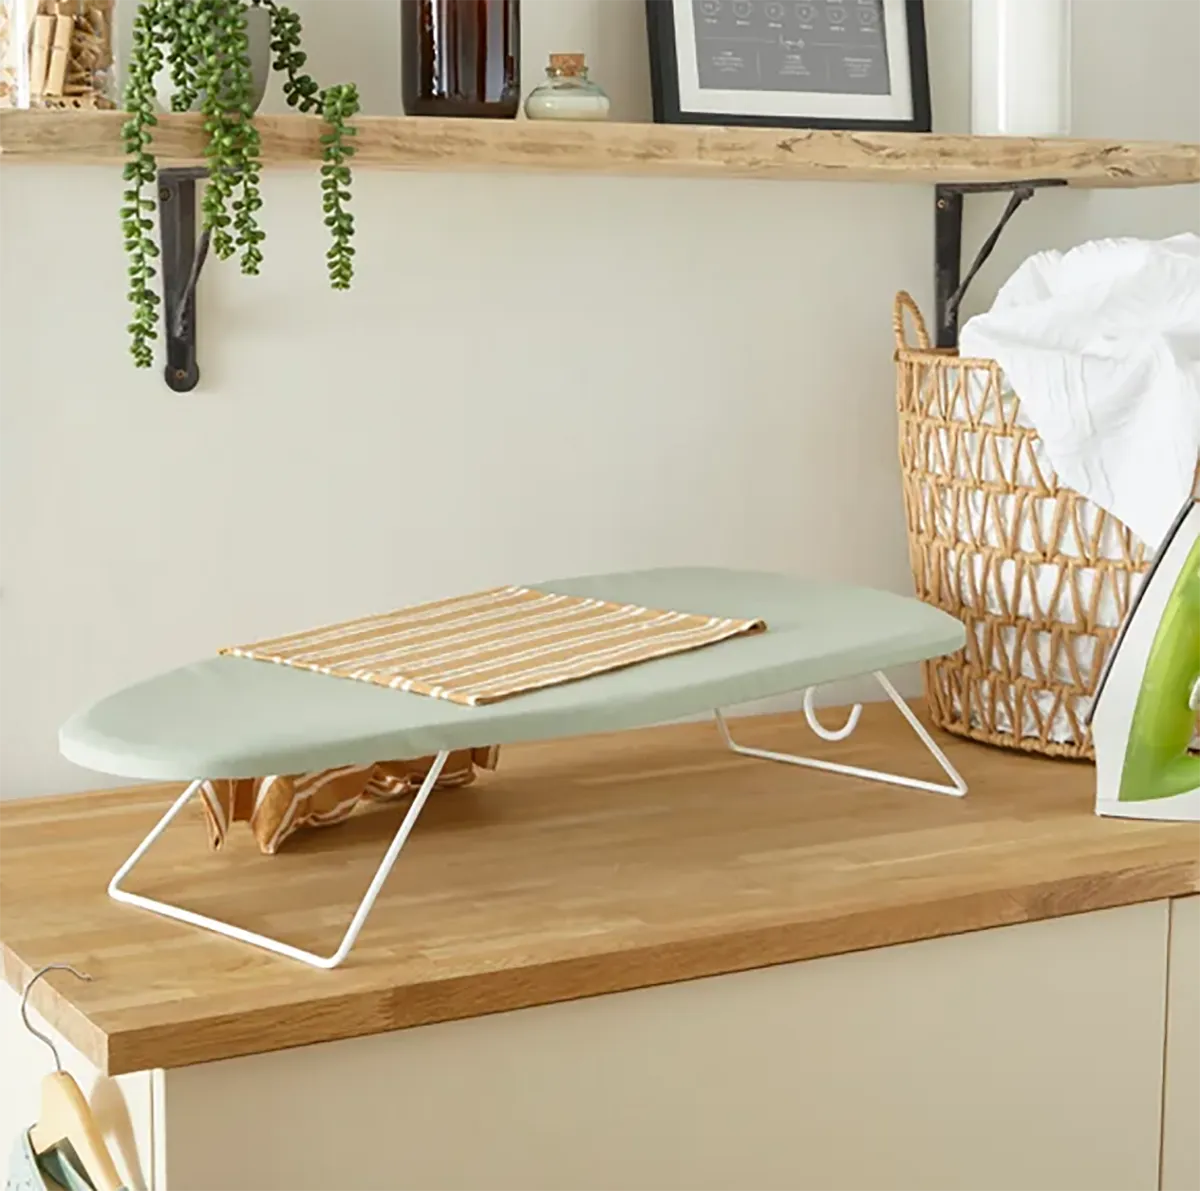 Dunelm’s Table Top Ironing Board